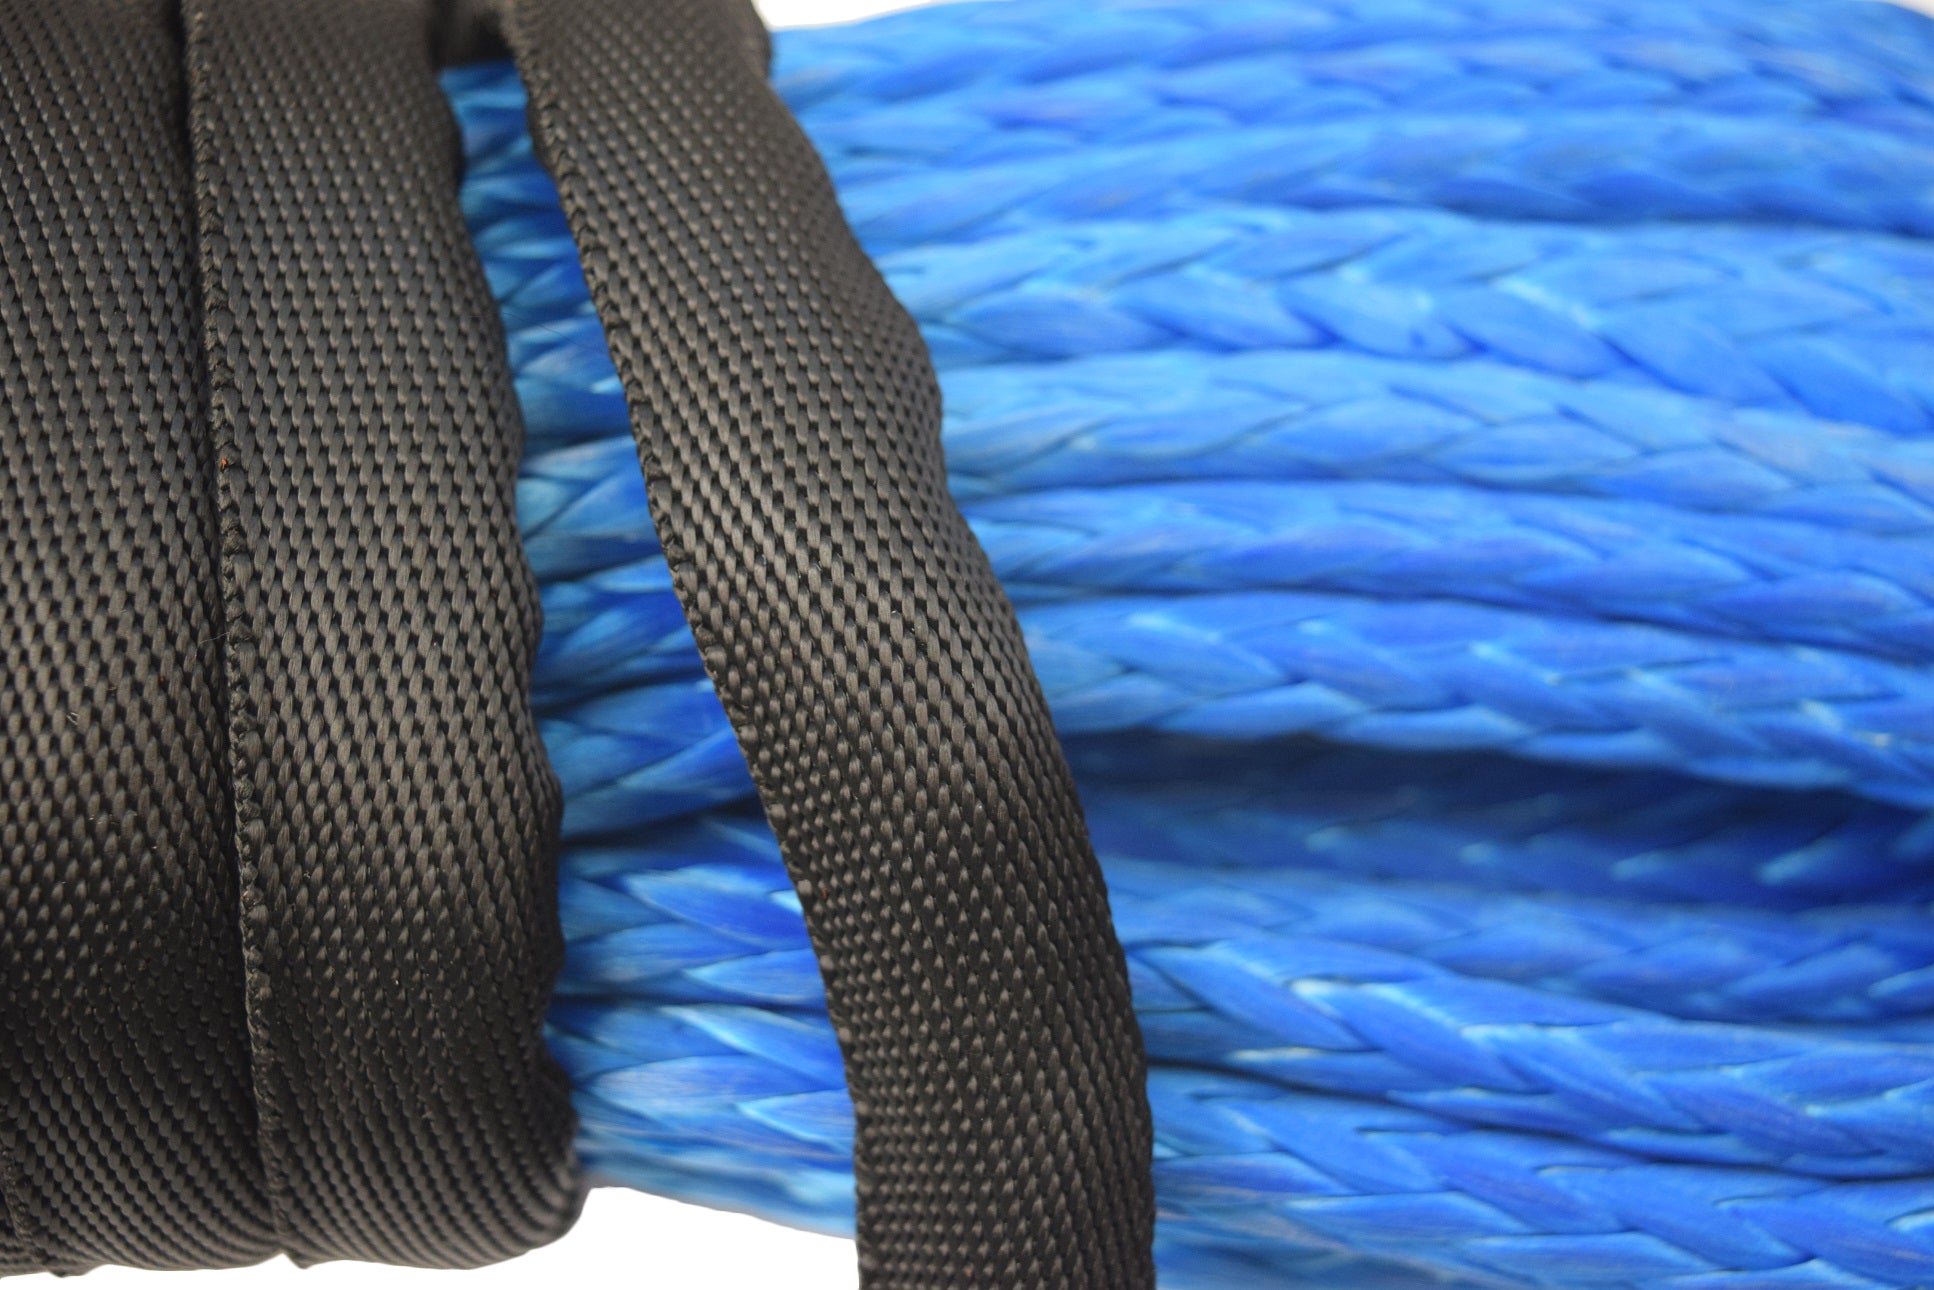 14mm*45m Blue Synthetic Winch Rope Cable for Jeep Pickup Truck